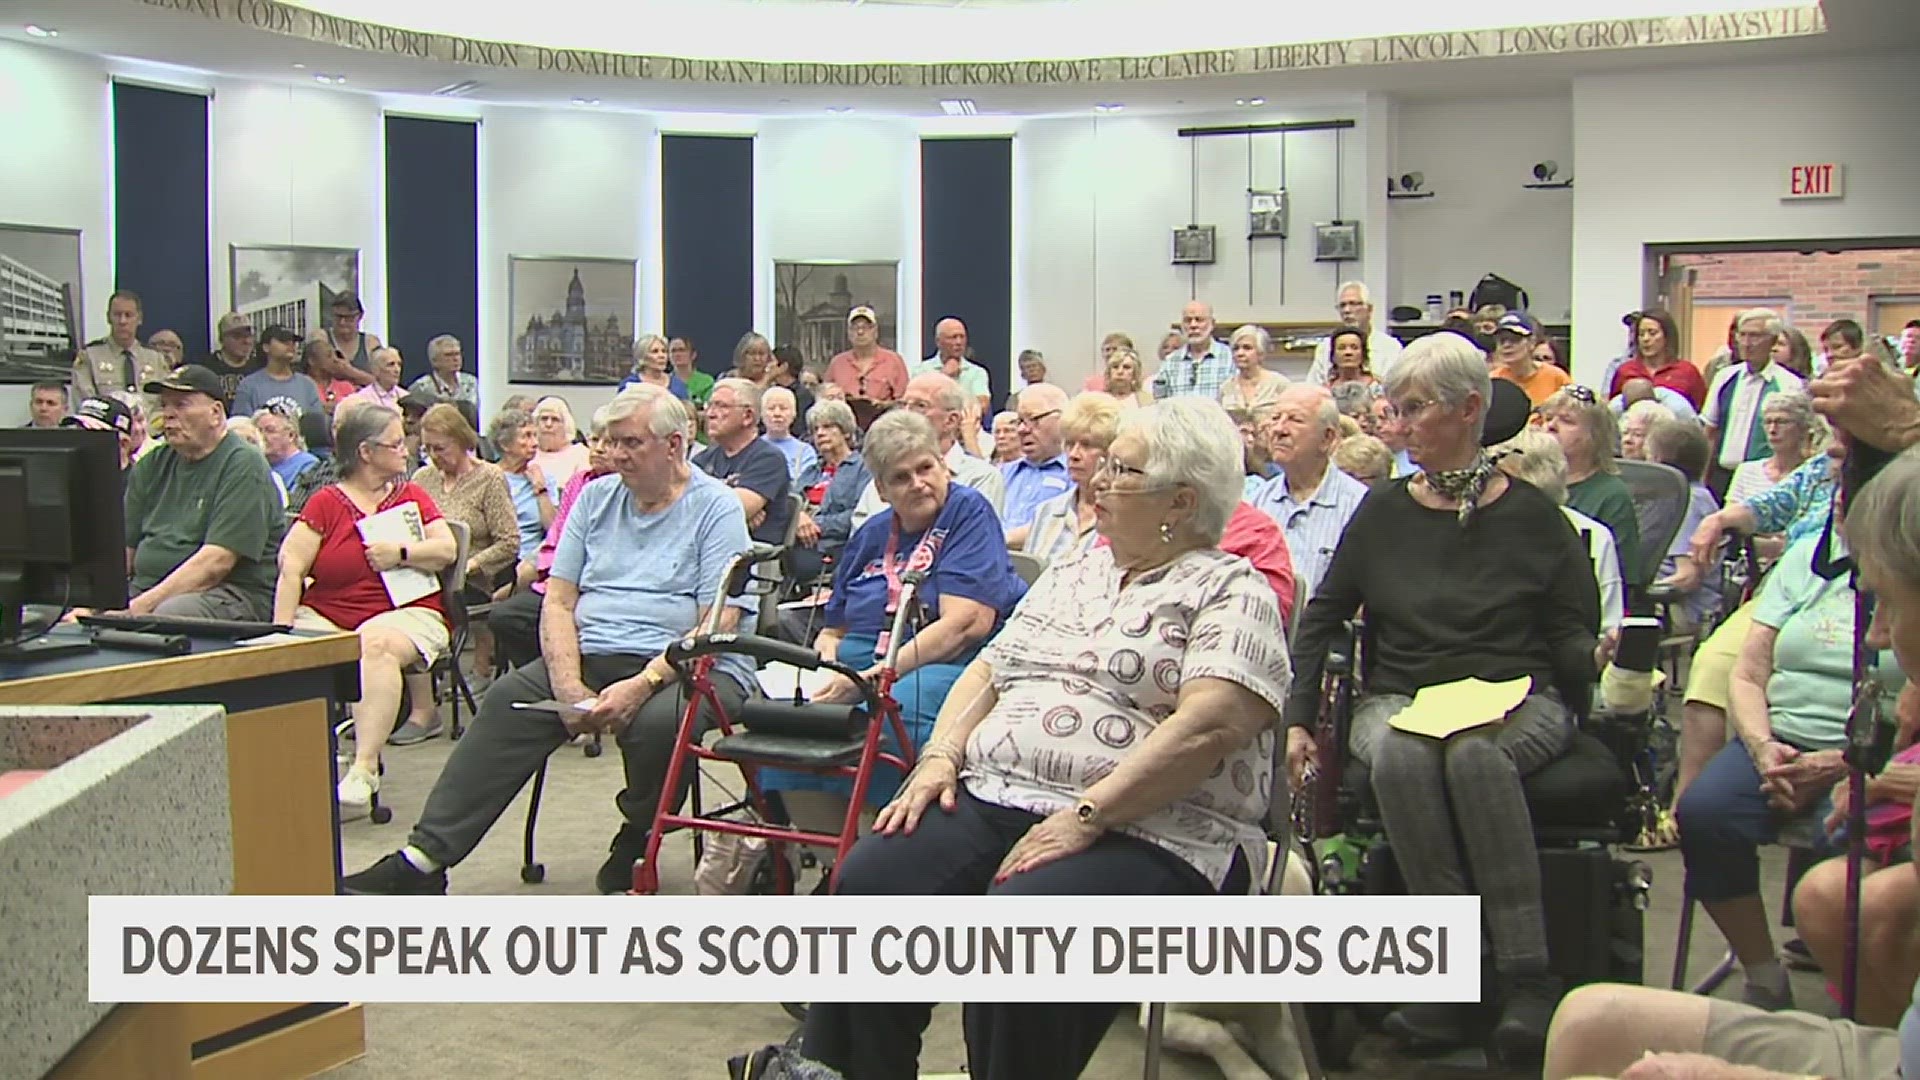 County leaders voted to eliminate CASI's funding of more than $200,000.